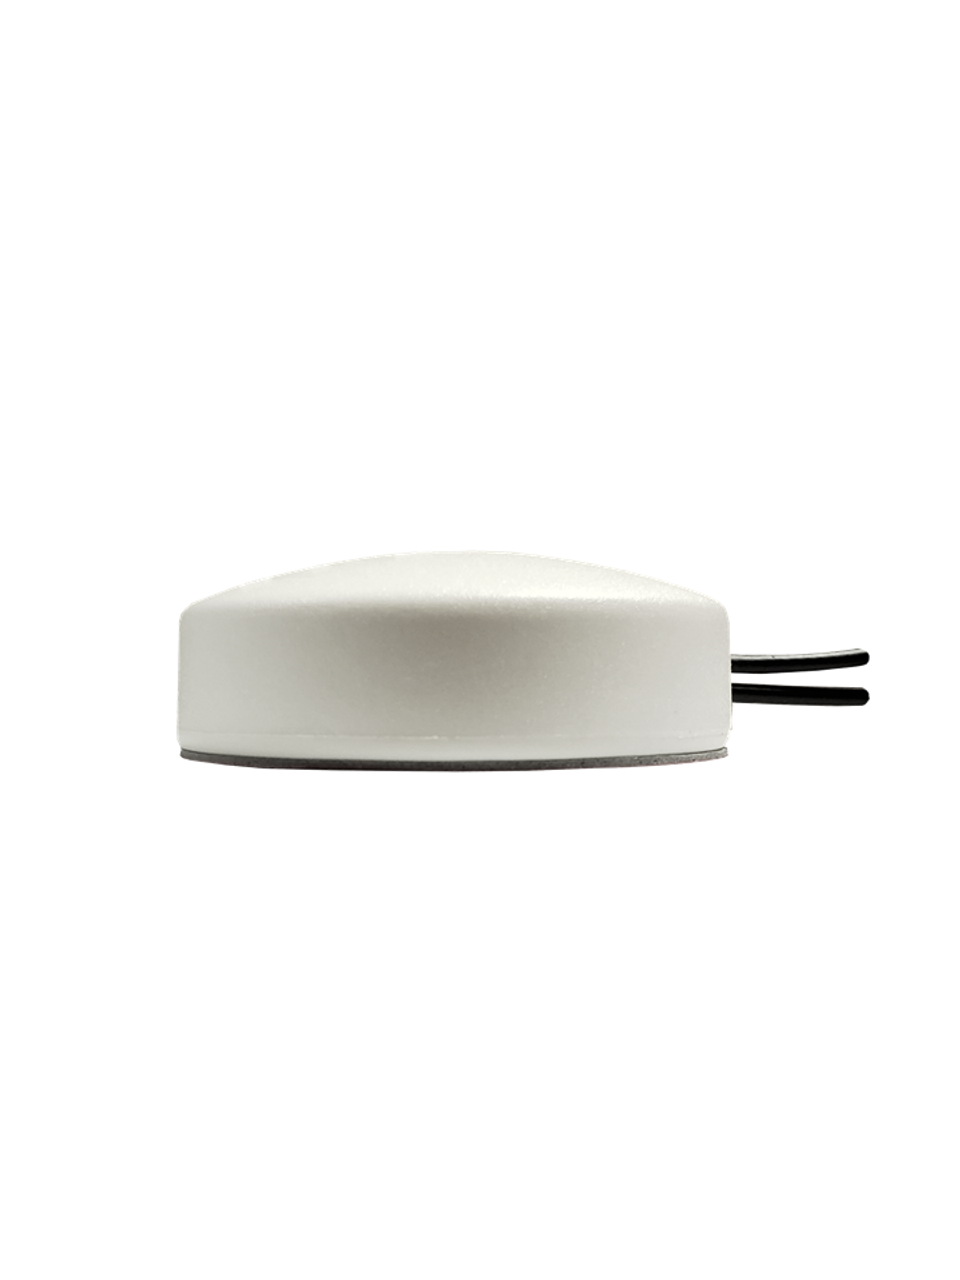 M400 2-Lead MIMO Cellular 3G 4G 5G LTE Adhesive Mount M2M IoT Antenna for BEC MX-221P Router